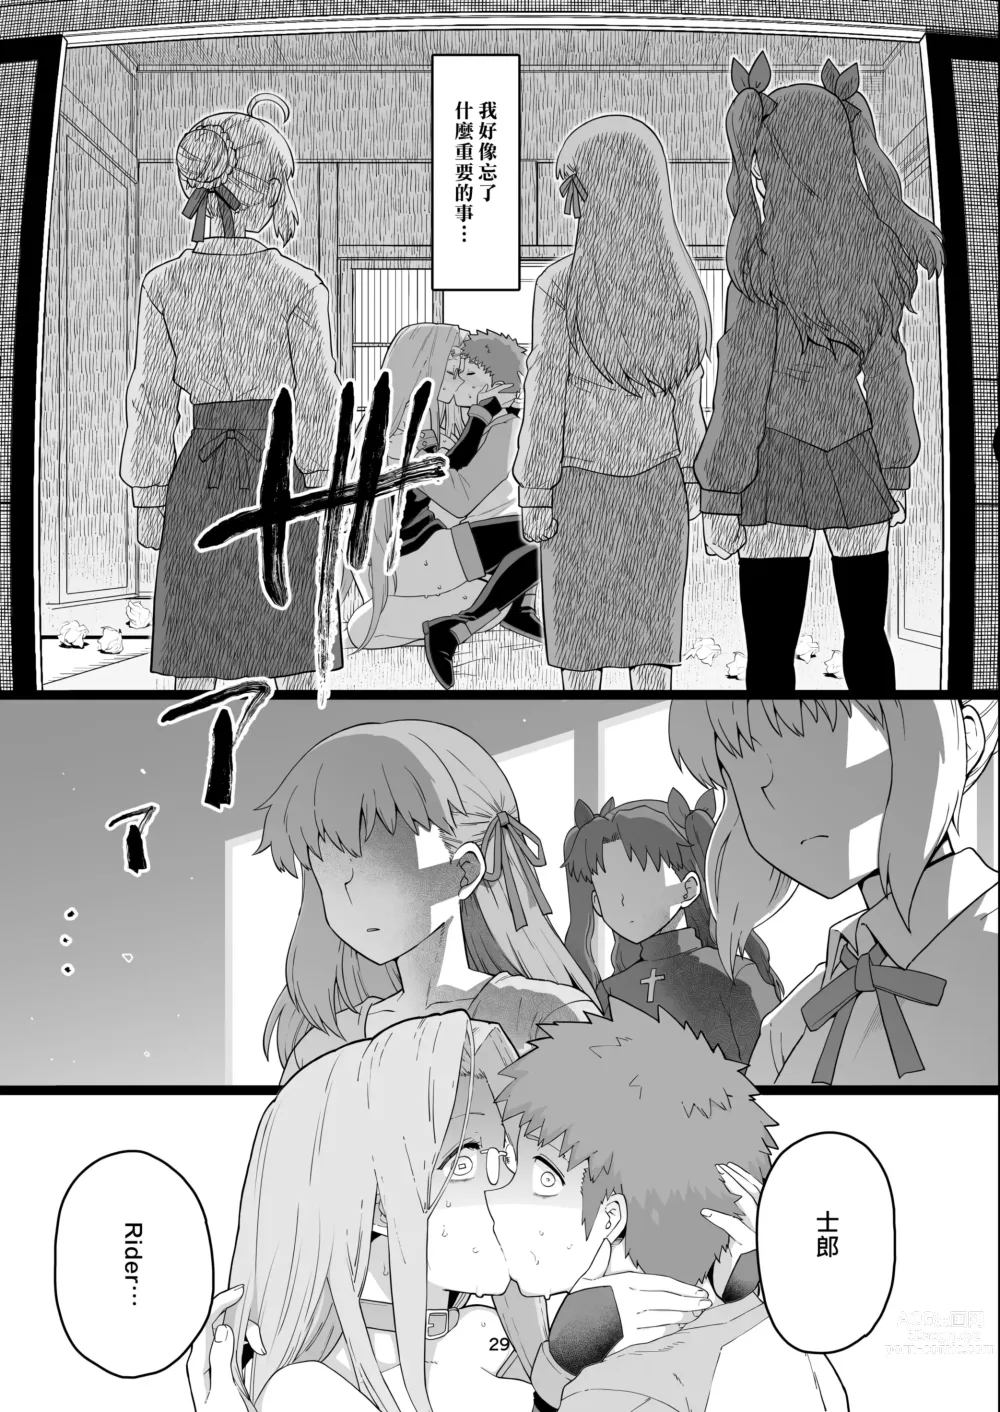 Page 32 of doujinshi Rider小姐的偷吃 (decensored)